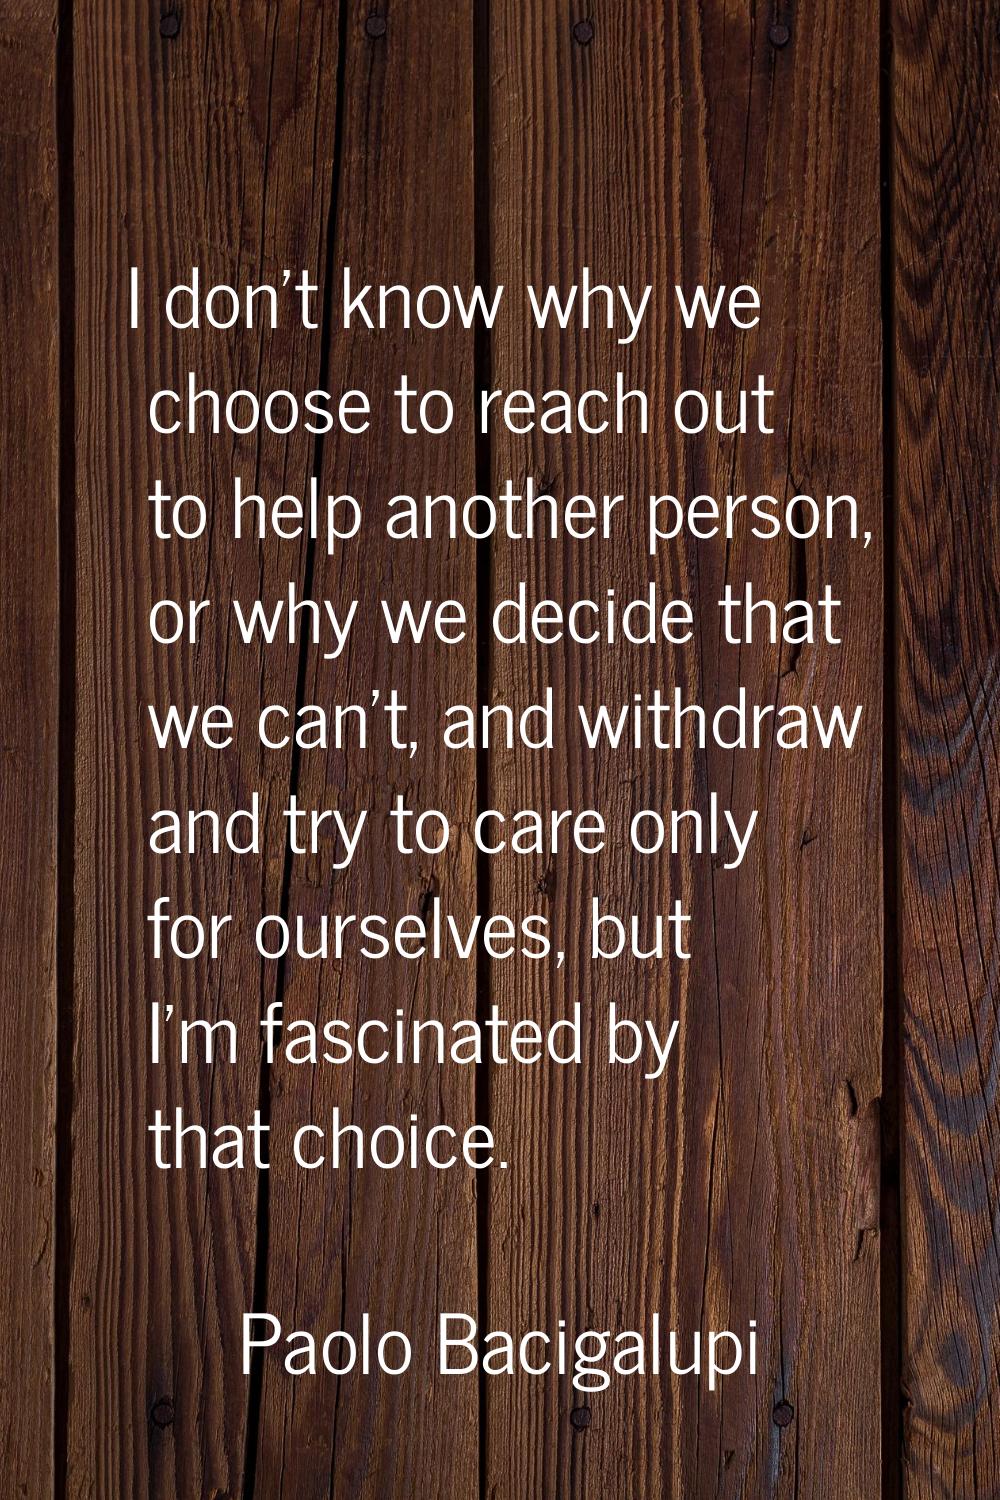 I don't know why we choose to reach out to help another person, or why we decide that we can't, and